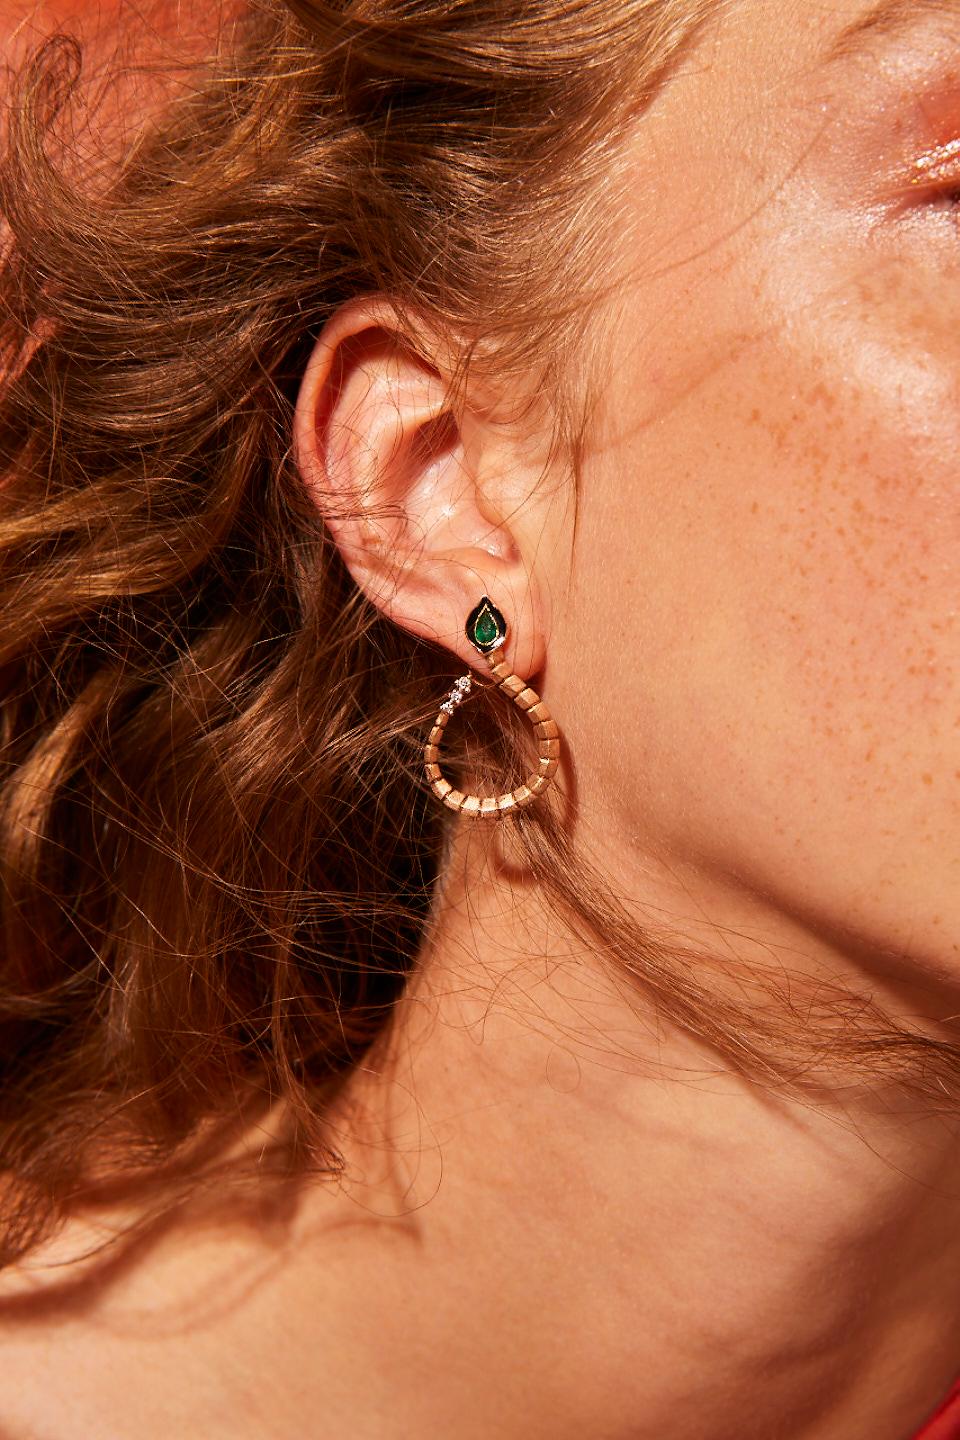 Dragon Lady Collection is inspired by the fire element which is one of the elements that represents our life energy. The main form of the collection is dragon; it is the symbol of strength, courage and prosperity. 

Baby dragon emerald hoop earrings